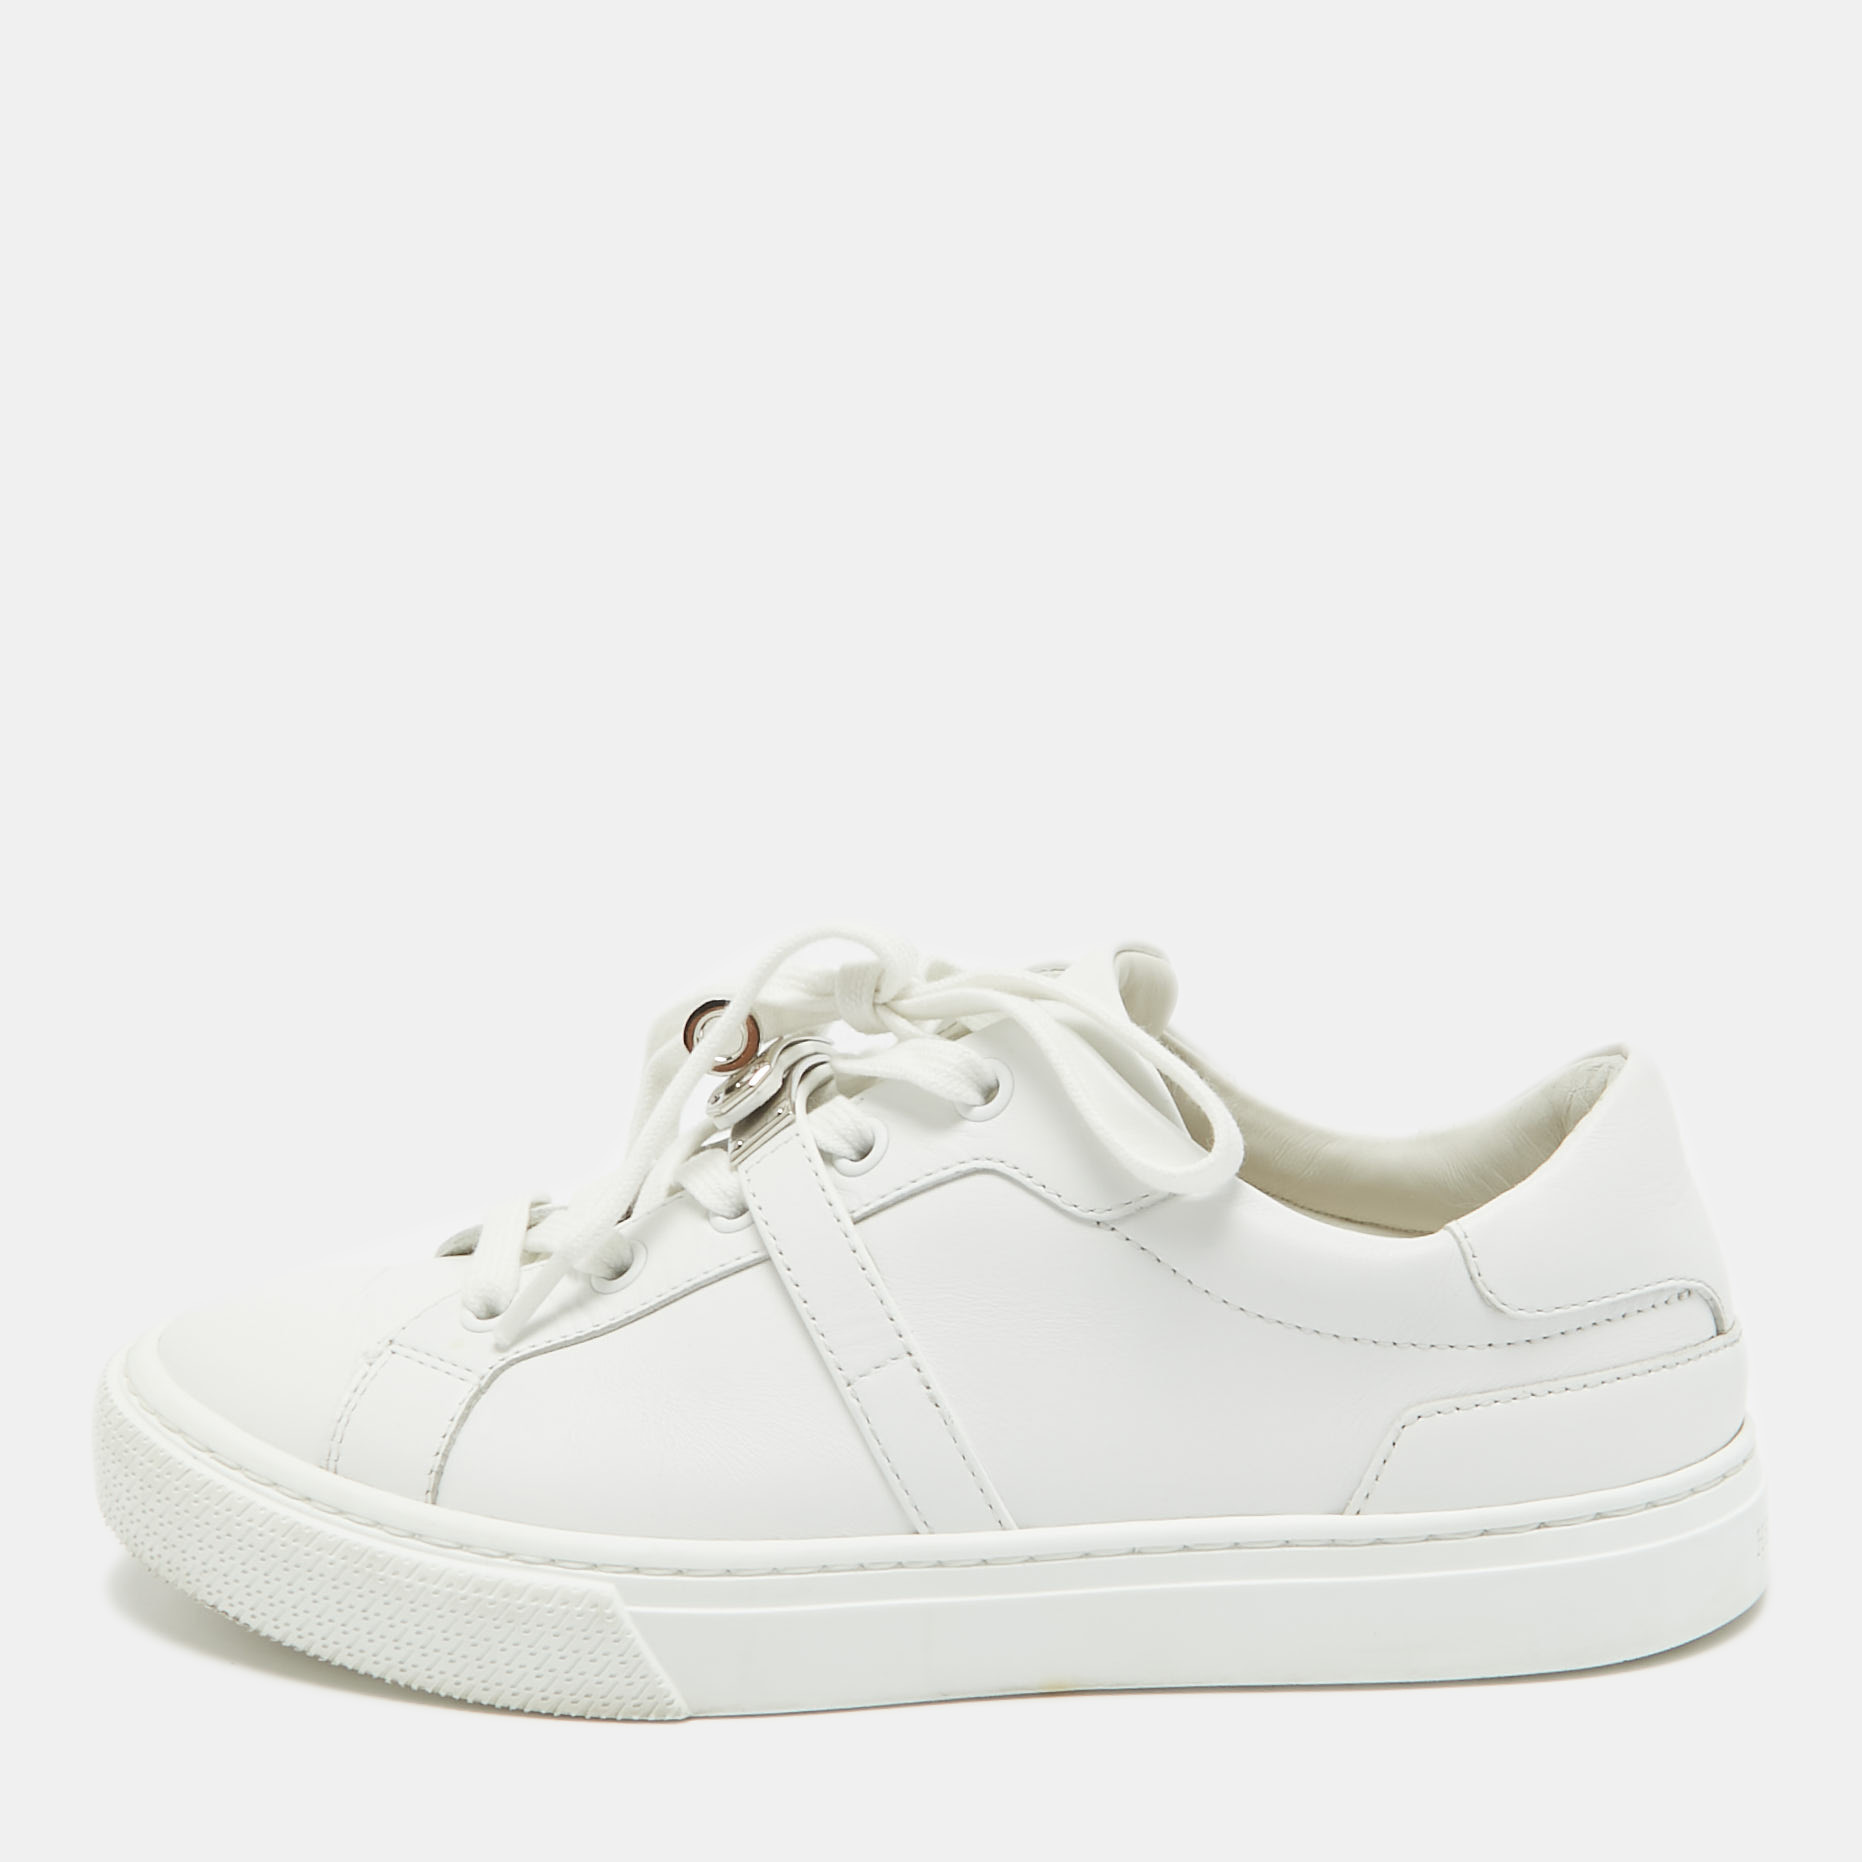 How chic are these Hermès sneakers flaunting a white exterior Theyve been made using luxe leather into a low top design and have lace ups silver tone lock detailing comfy insoles and durable soles. Team them with your casual dresses and jeans.